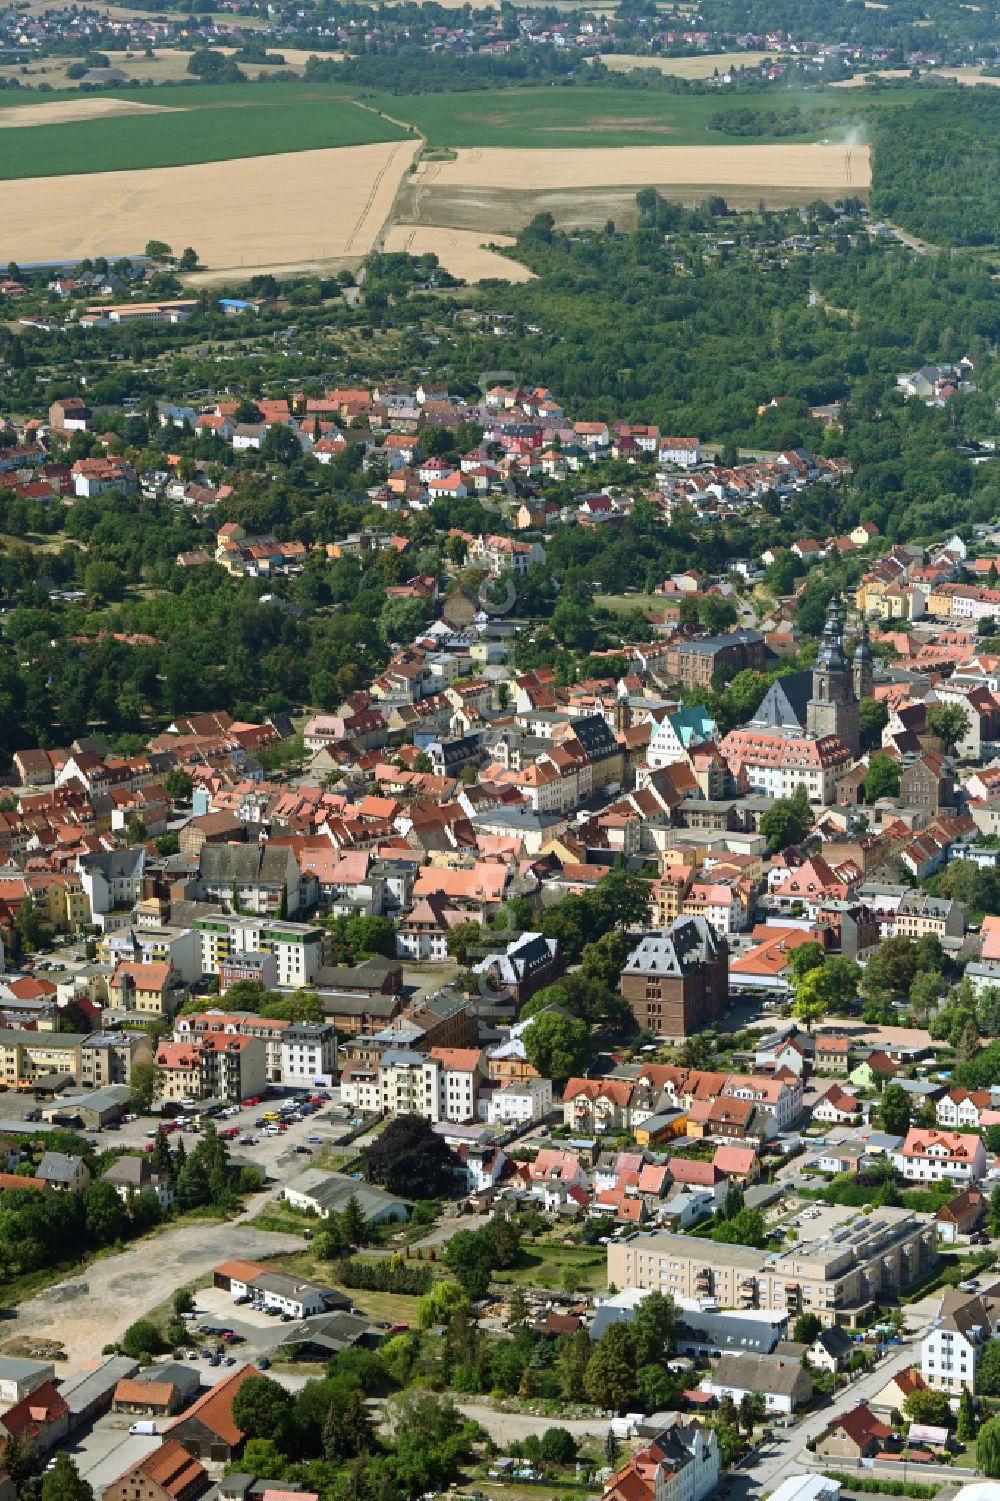 Aerial image Lutherstadt Eisleben - City view of downtown area Eisleben in the district Osterhausen in Lutherstadt Eisleben in the state Saxony-Anhalt